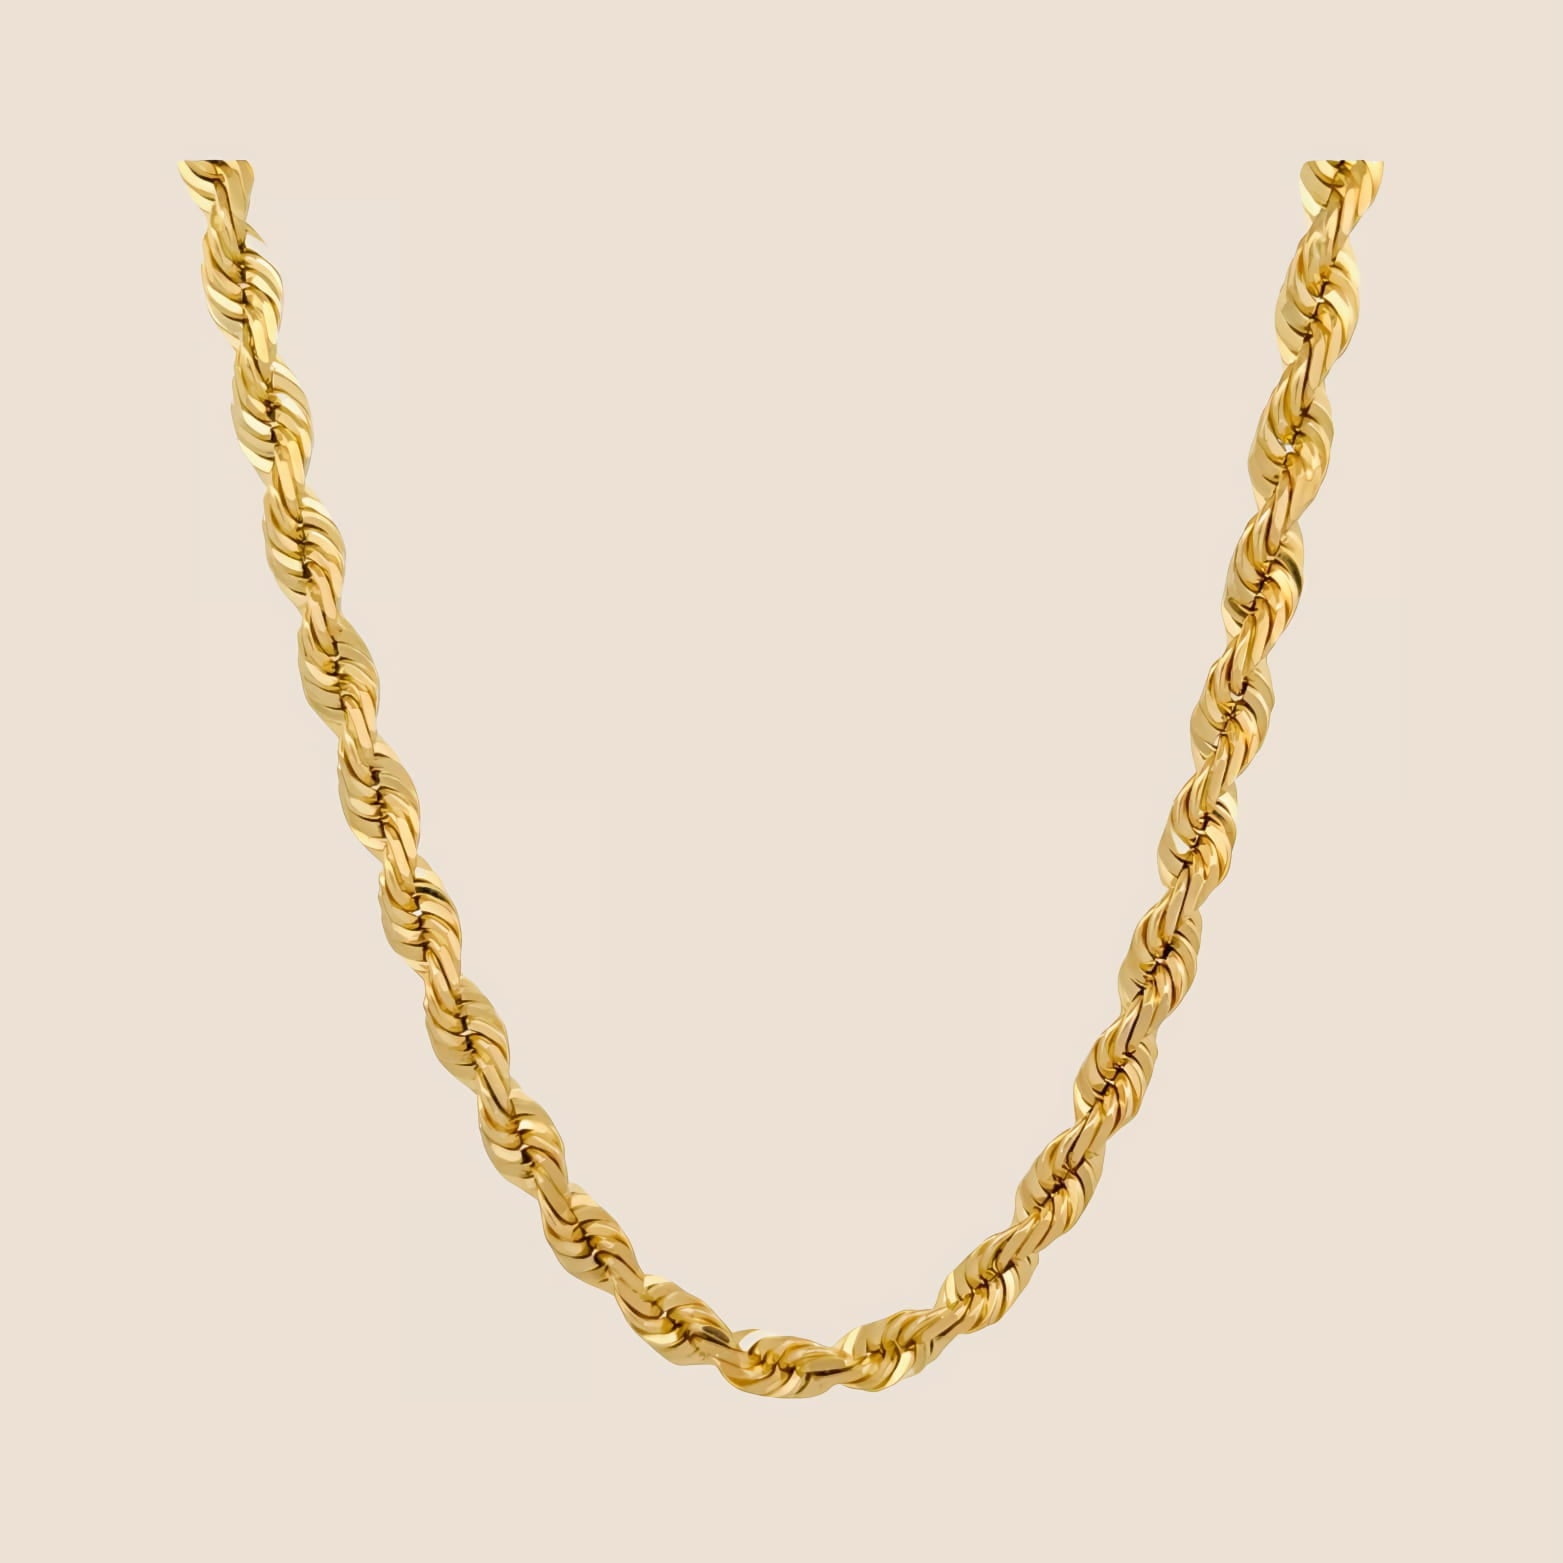 Diamond2Deal 14K Yellow Gold 7mm Rope Chain Necklace 22inch for Women, Women's, Size: 22 in